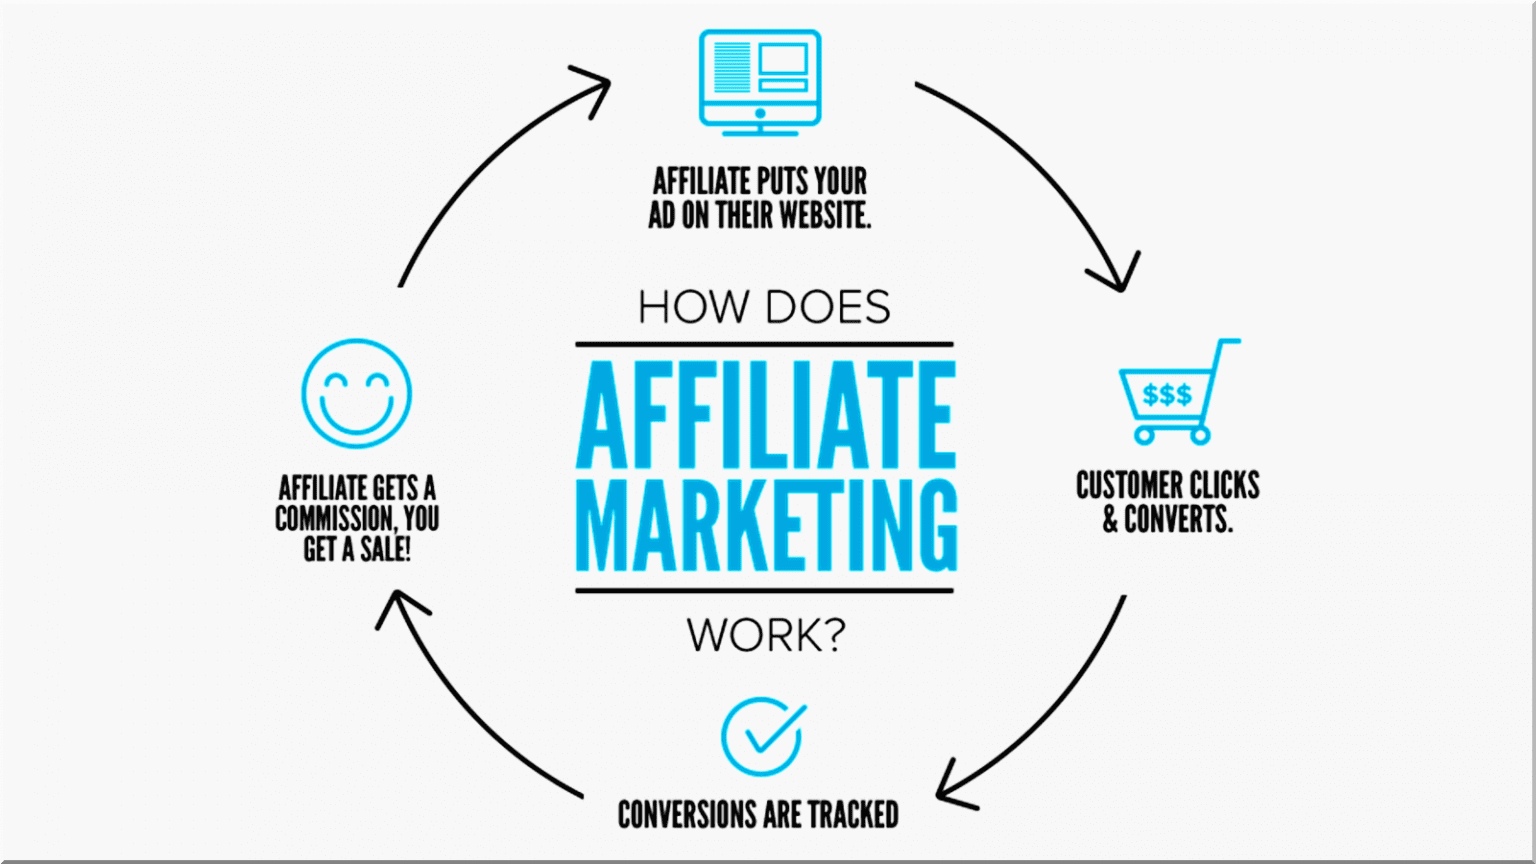 Affiliate marketing is different from partnership selling, but similar in many ways too!